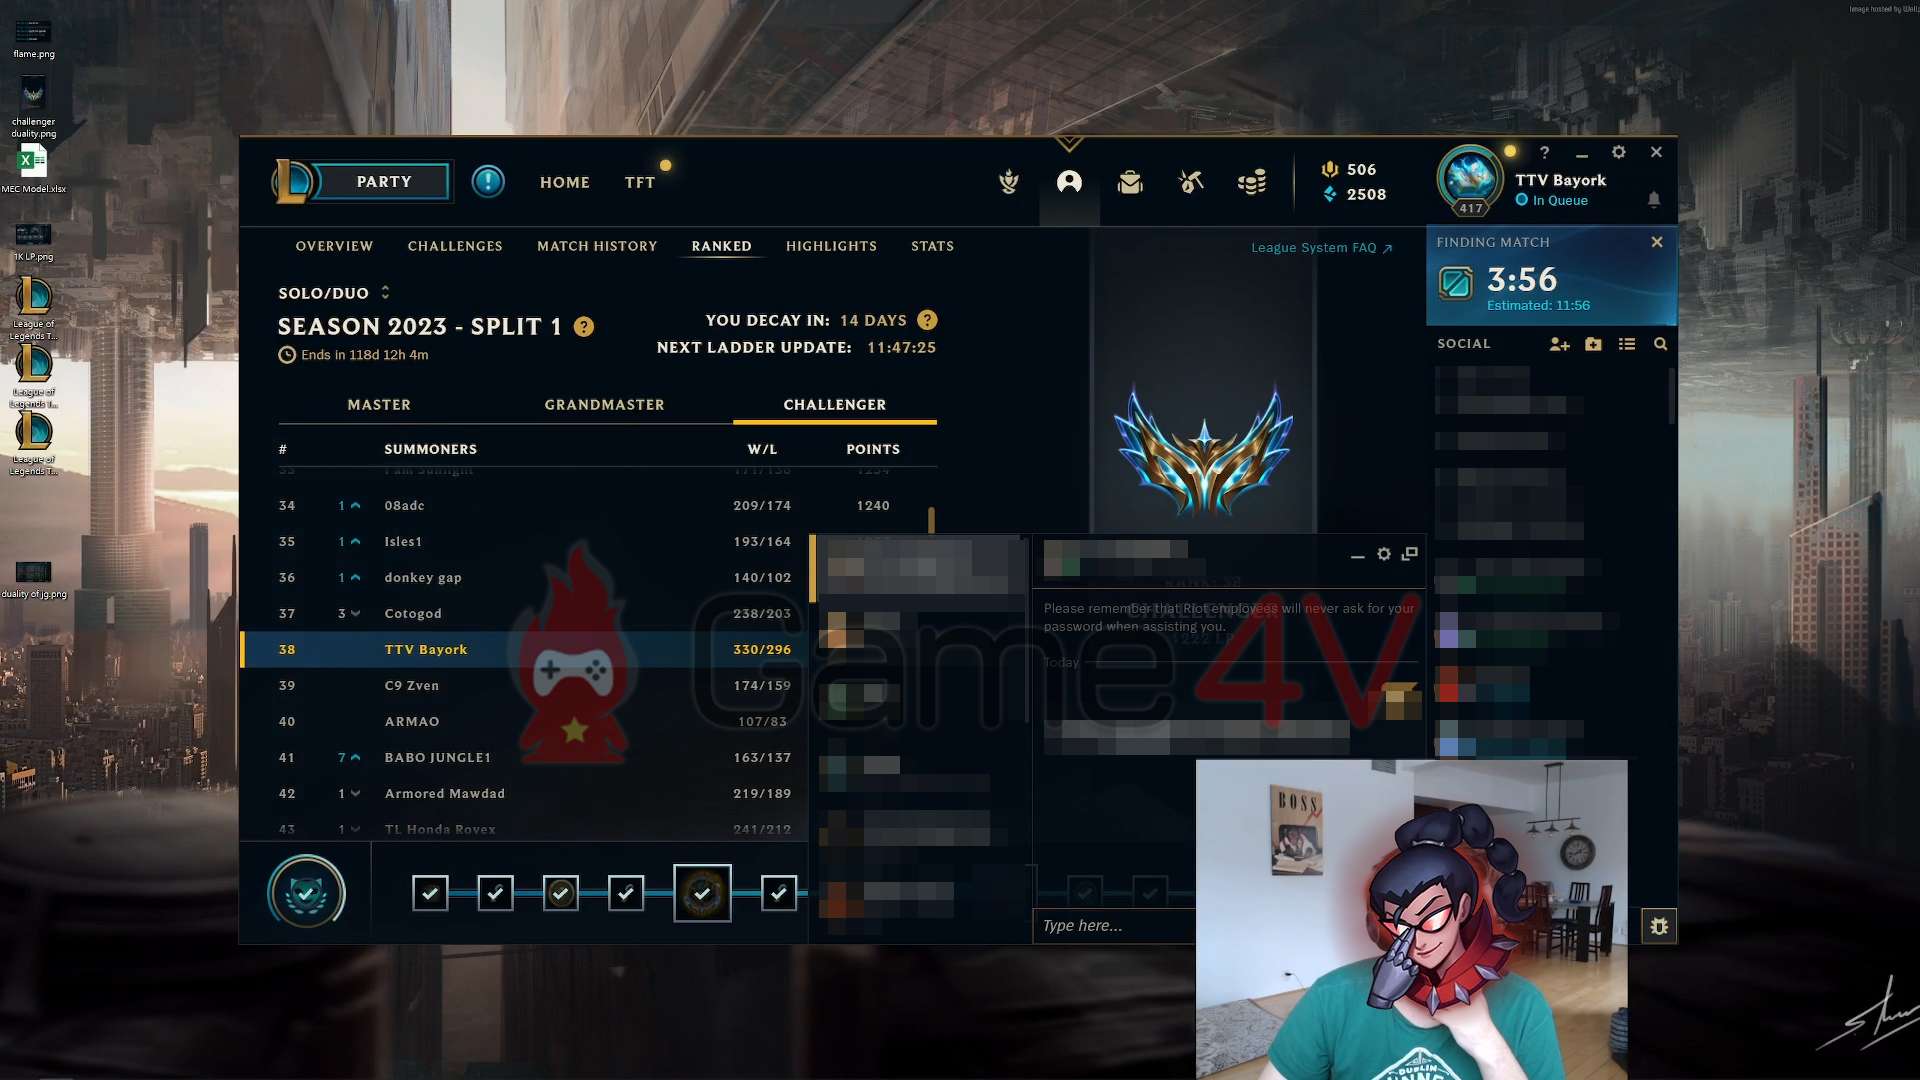 Champions Queue Challenge Streamer uses the tool without getting banned by Riot?